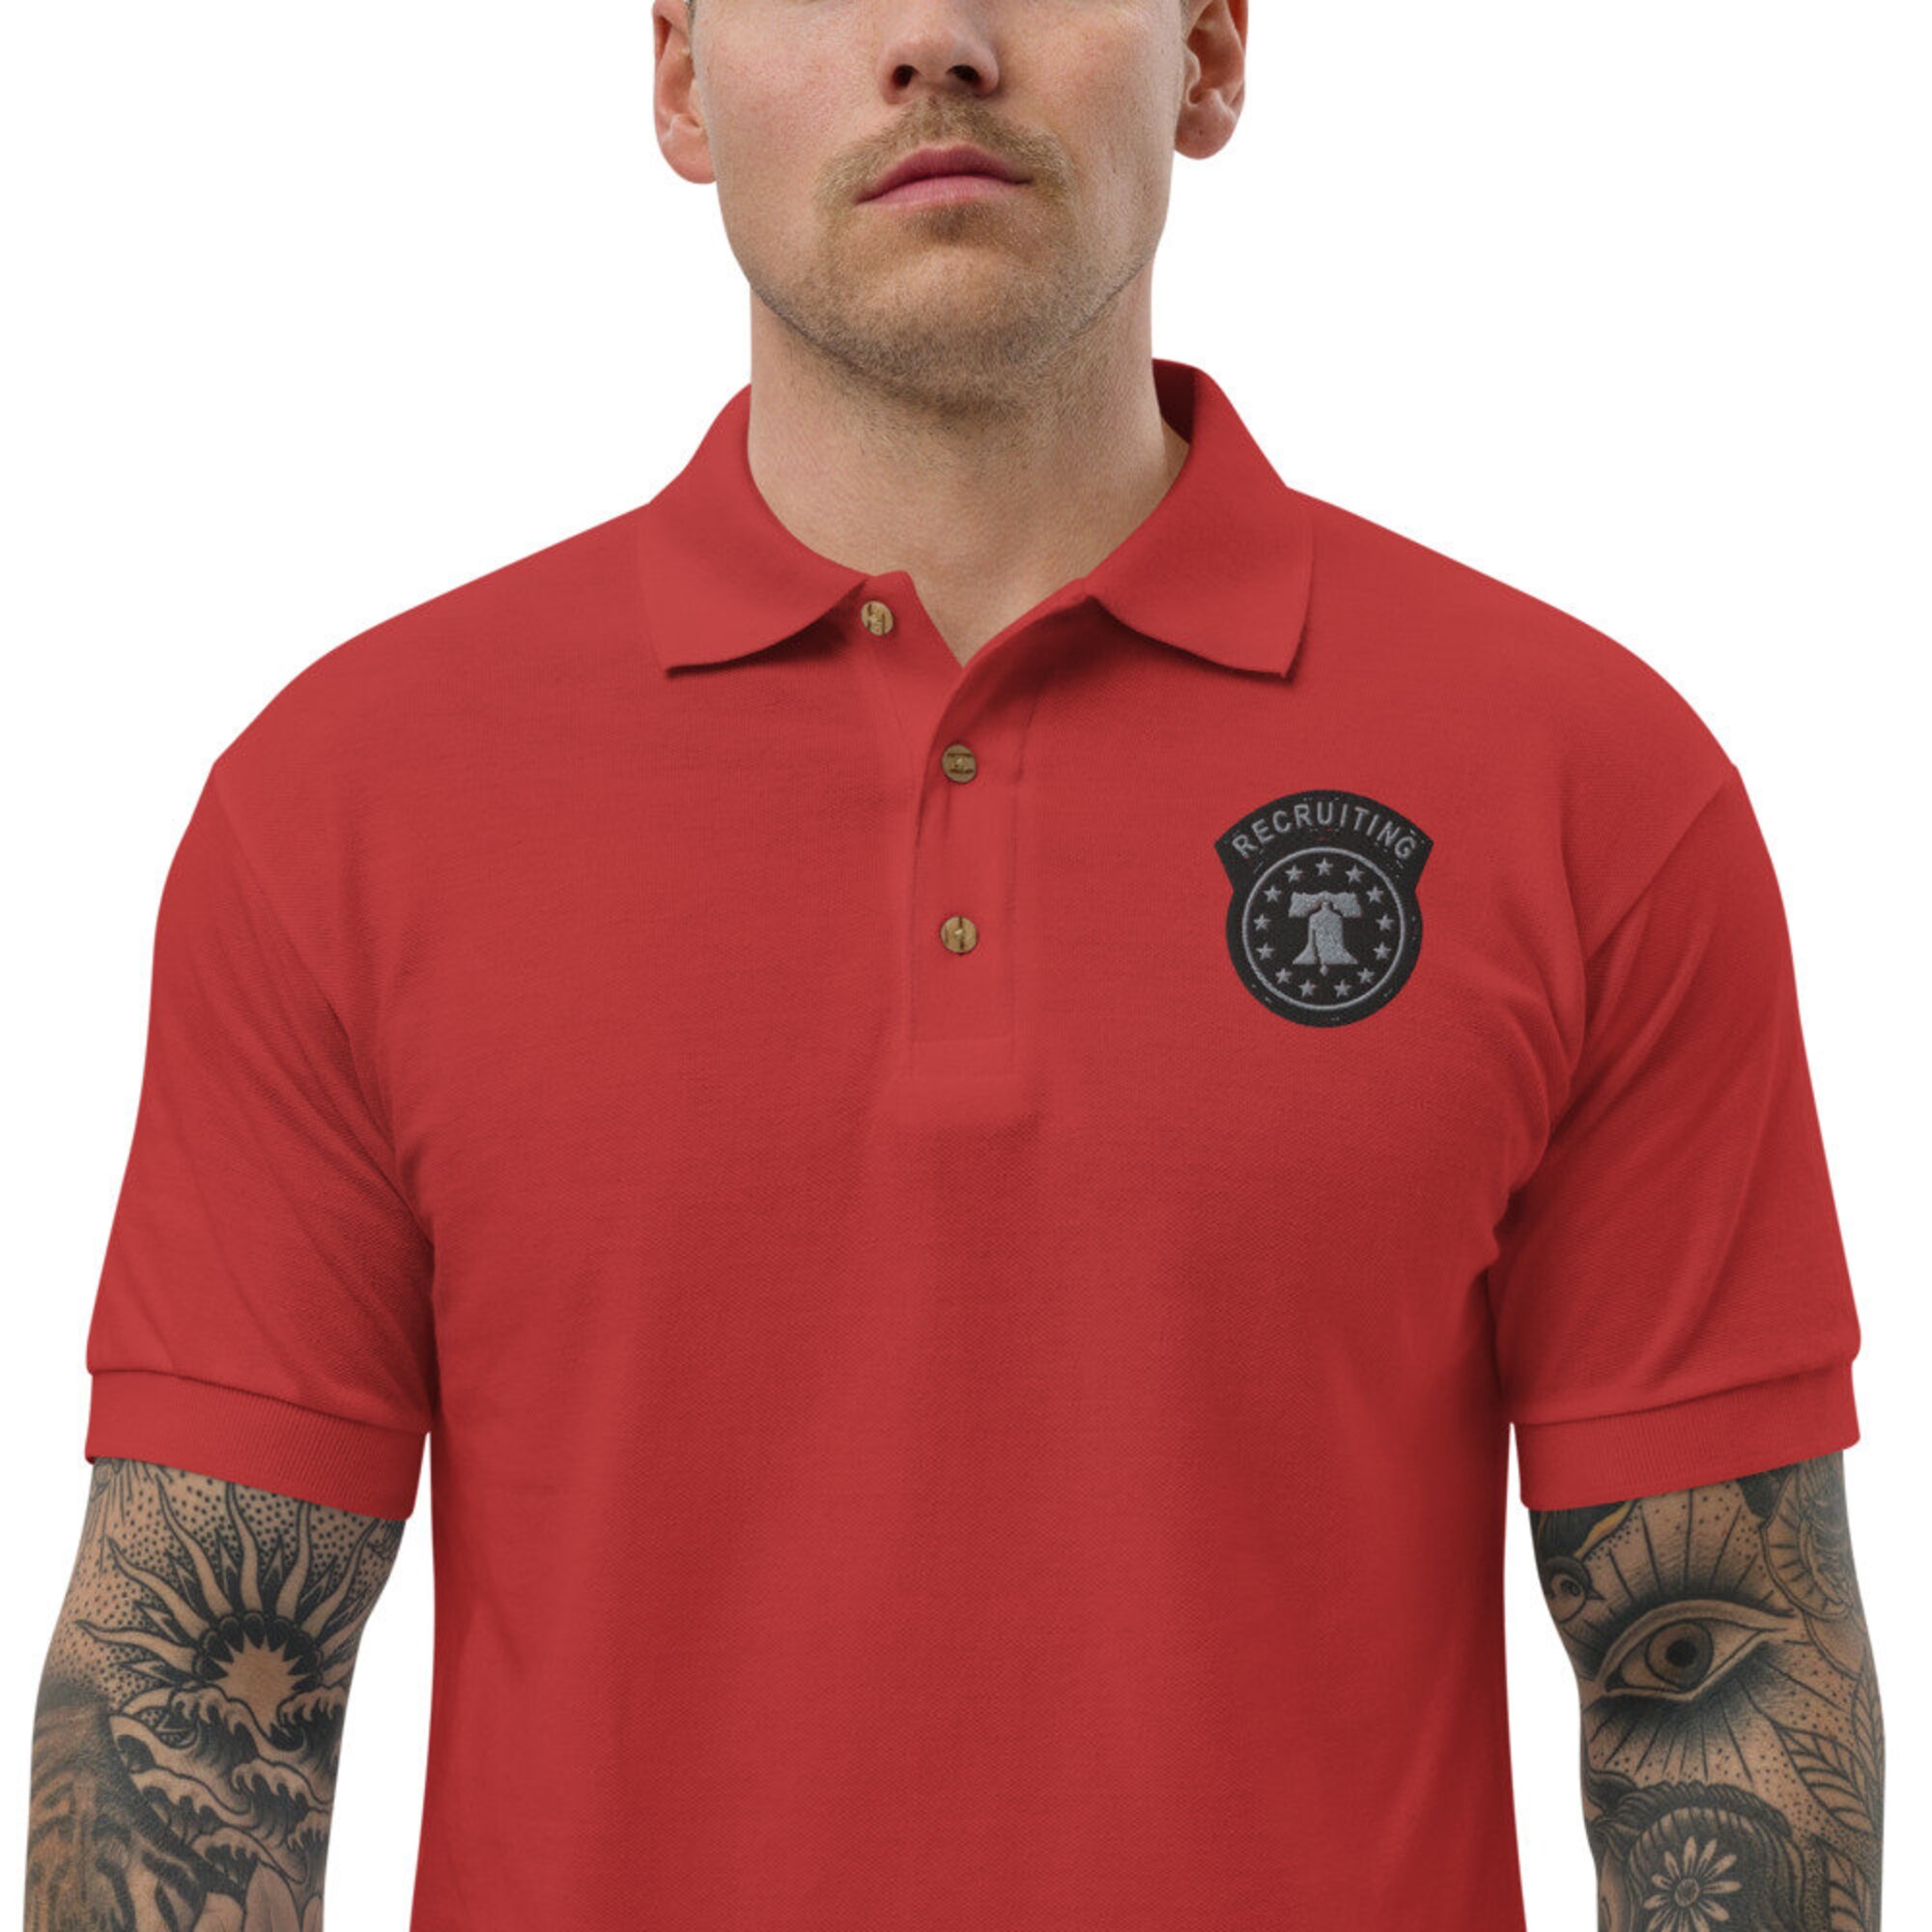 Discover Army Recruiting Embroidered Polo Shirt